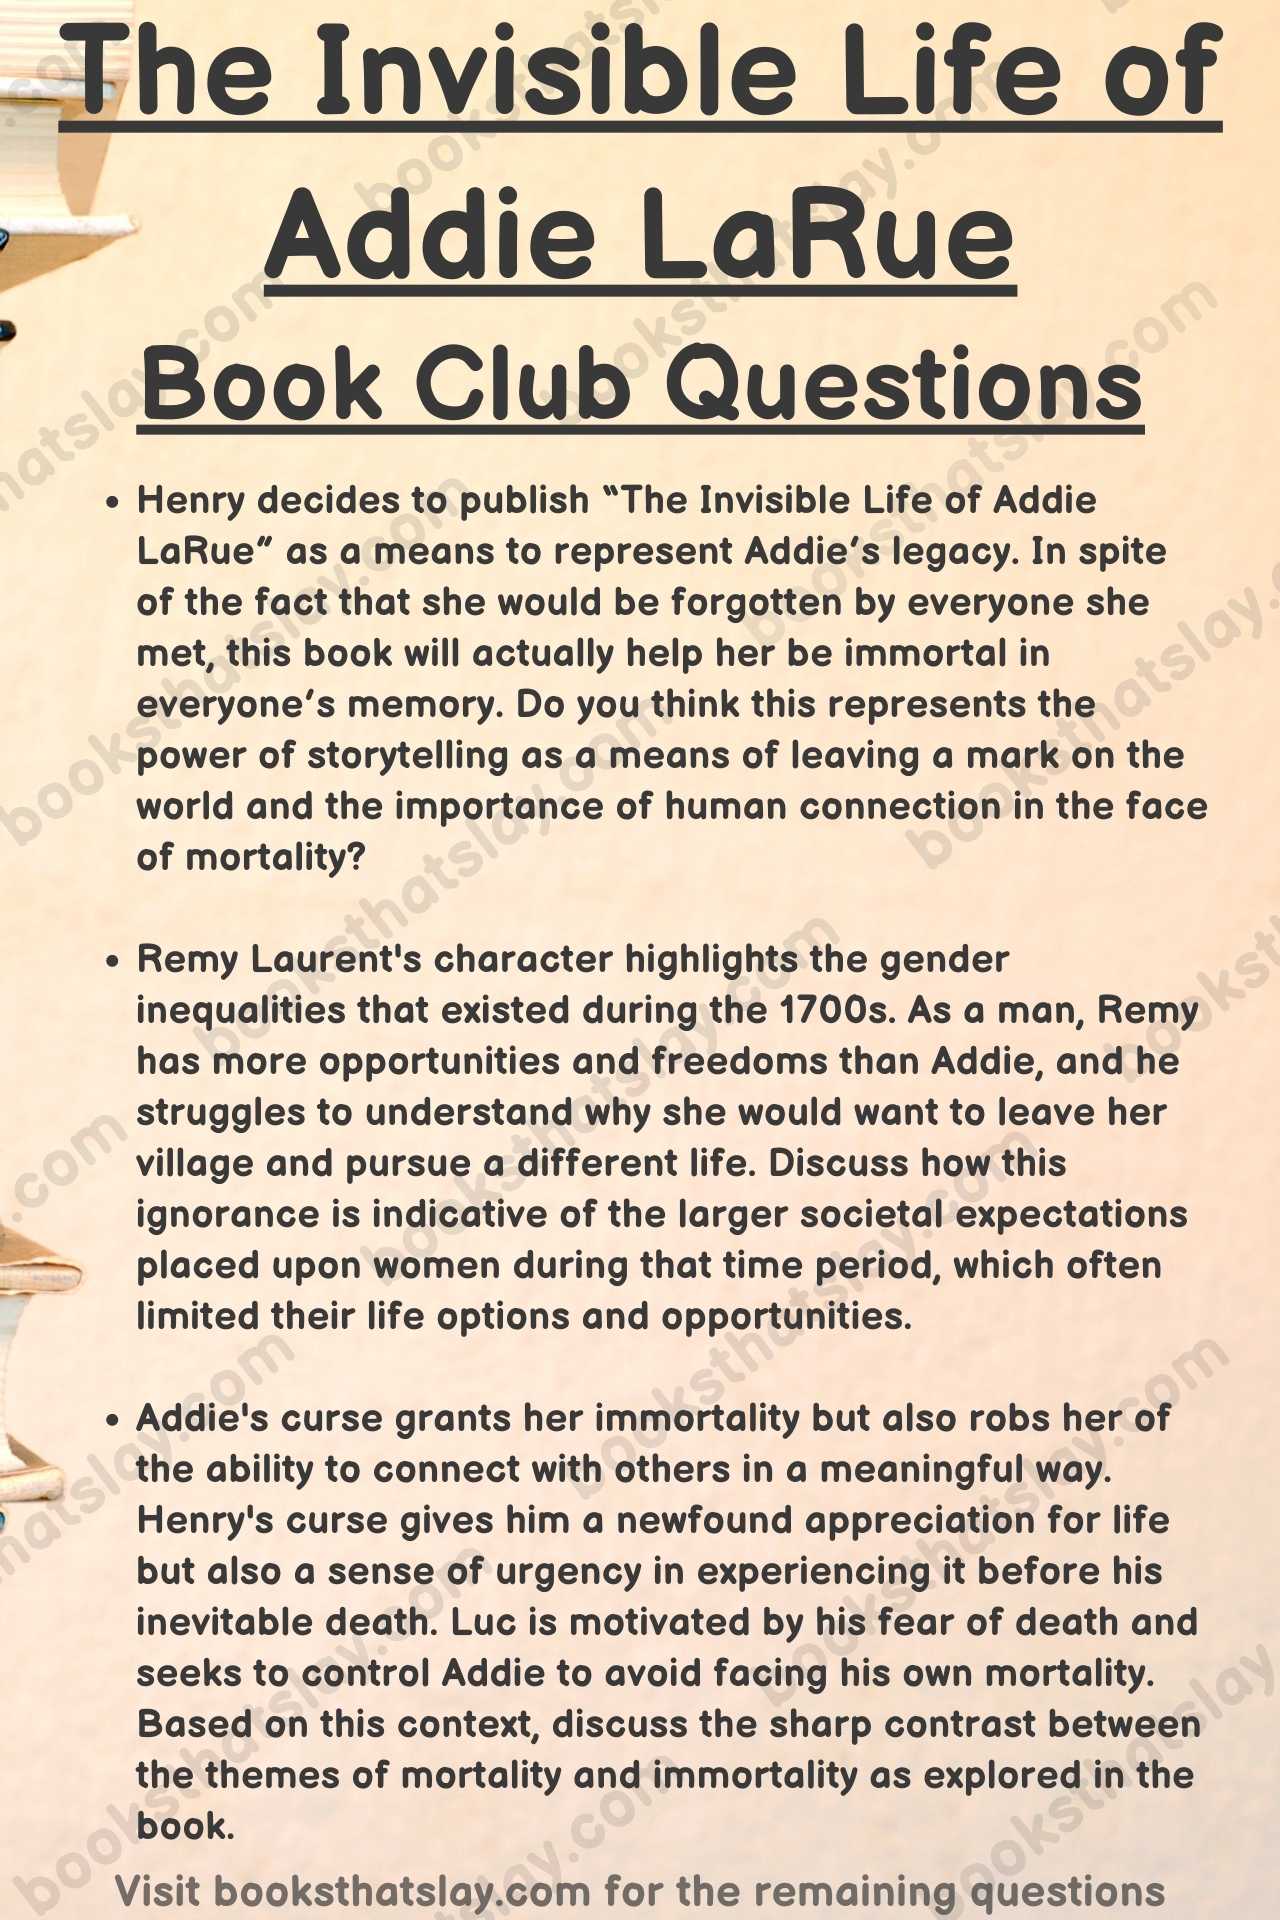 The Invisible Life of Addie LaRue Book Club Questions